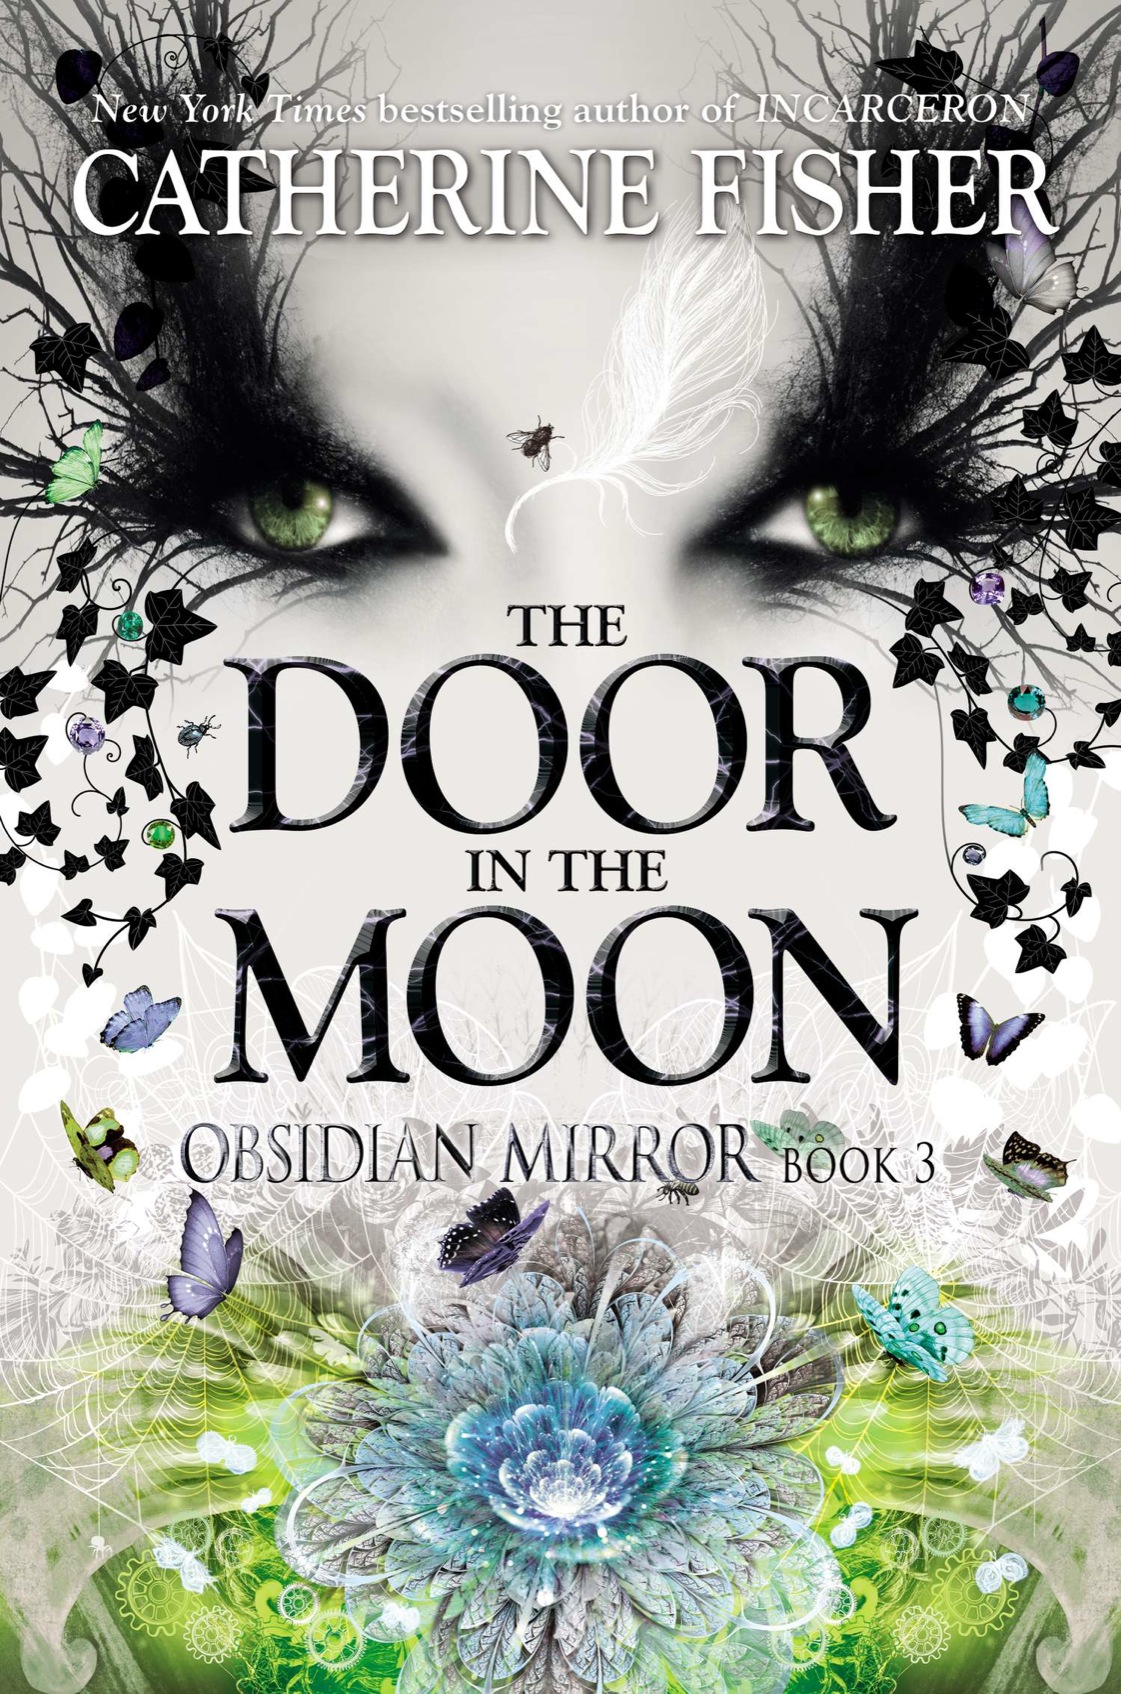 The Door in the Moon (2015) by Catherine Fisher